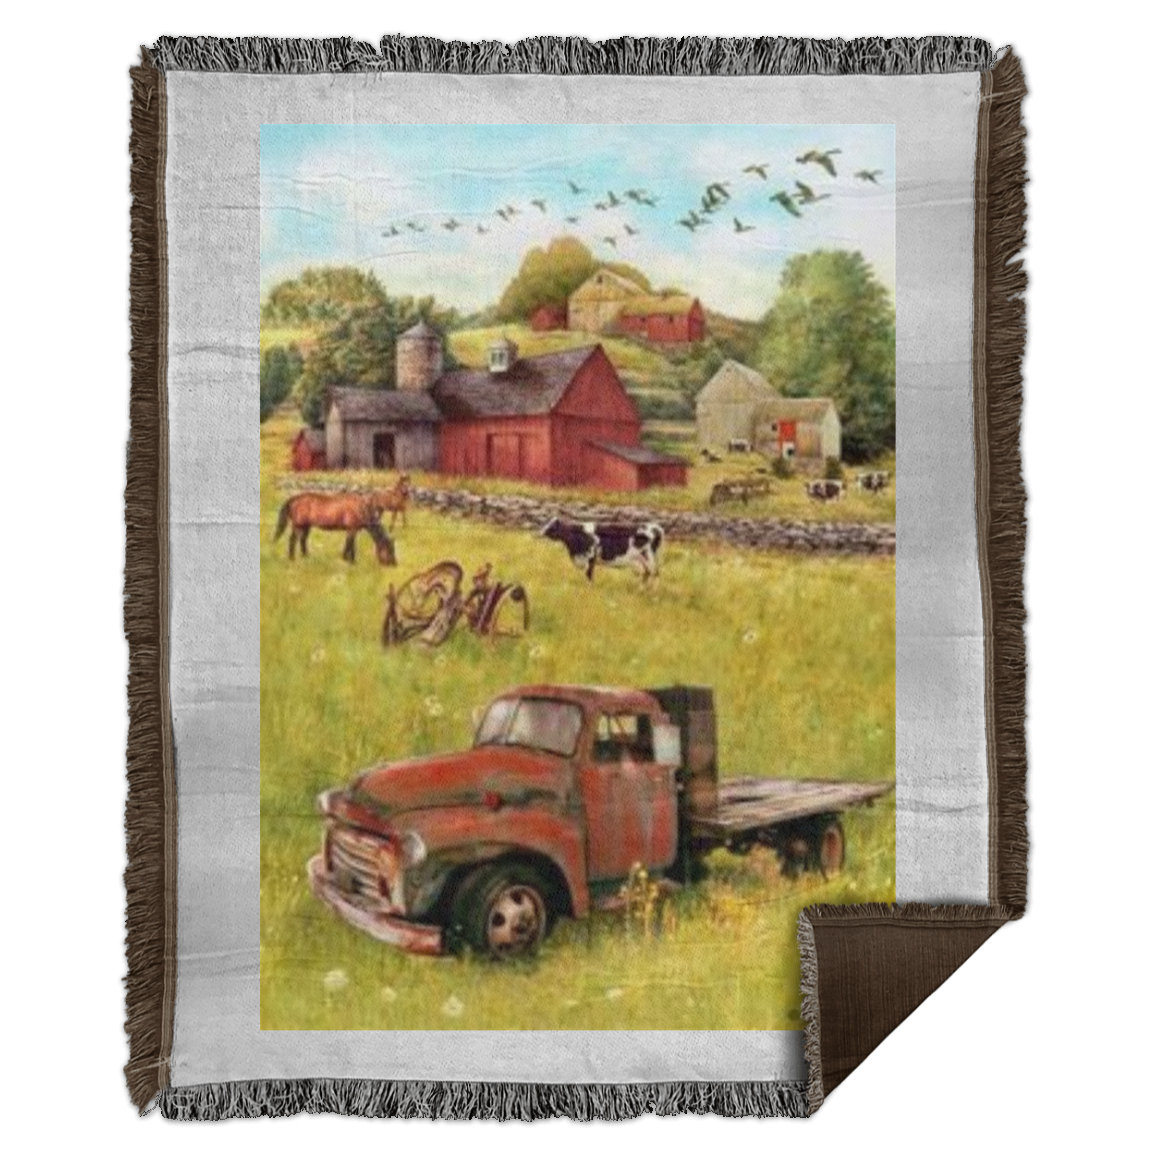 Farm Scene with Red Truck - Woven Blanket - 50x60